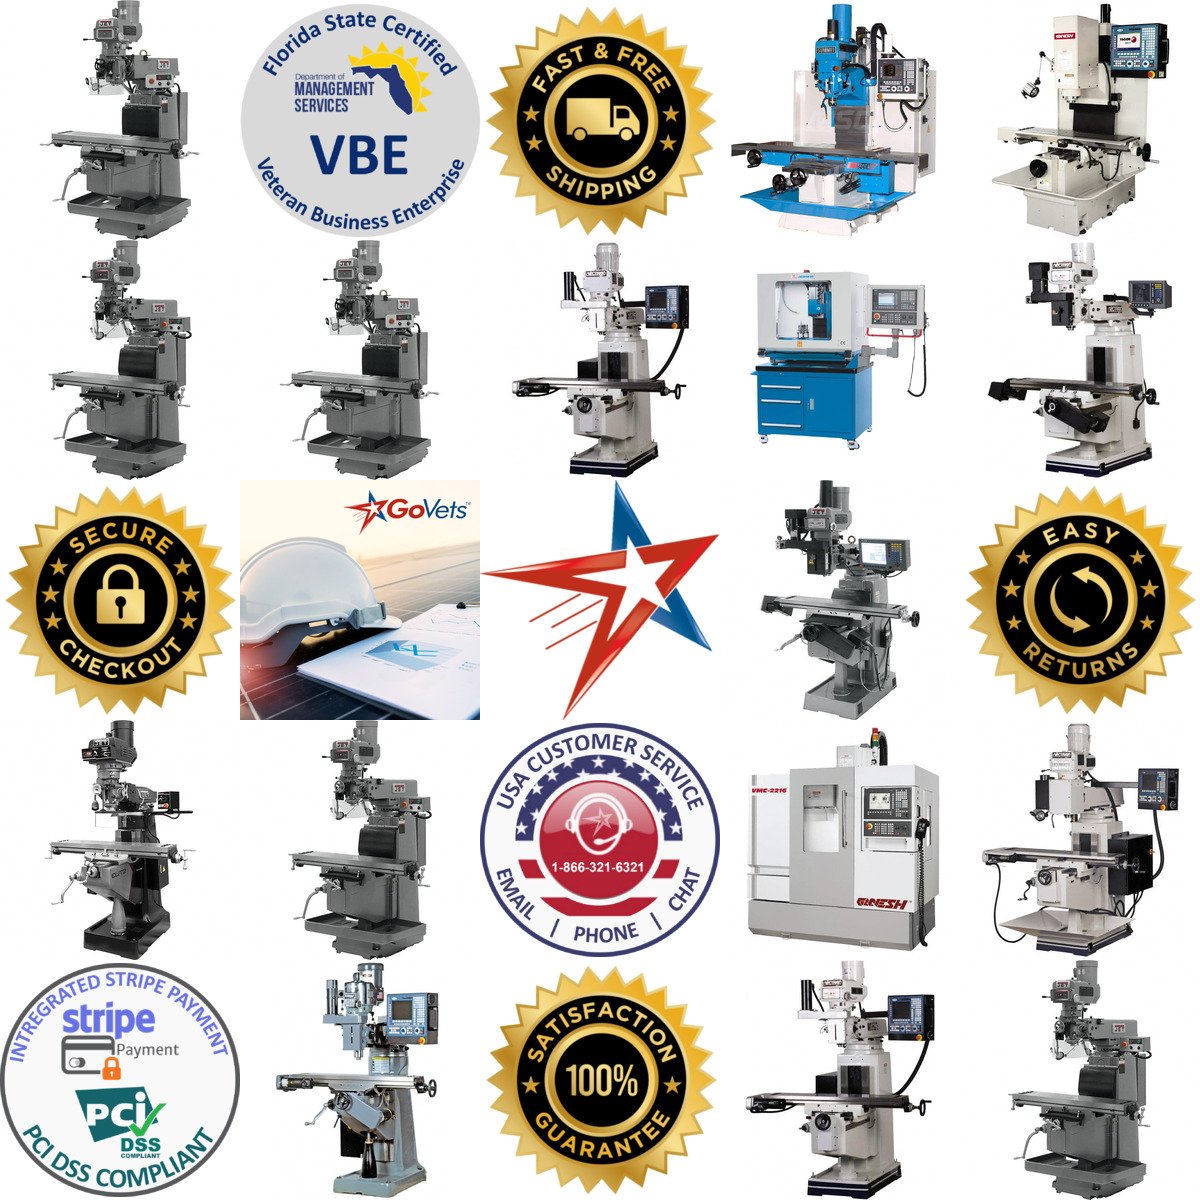 A selection of Cnc Milling Machines products on GoVets